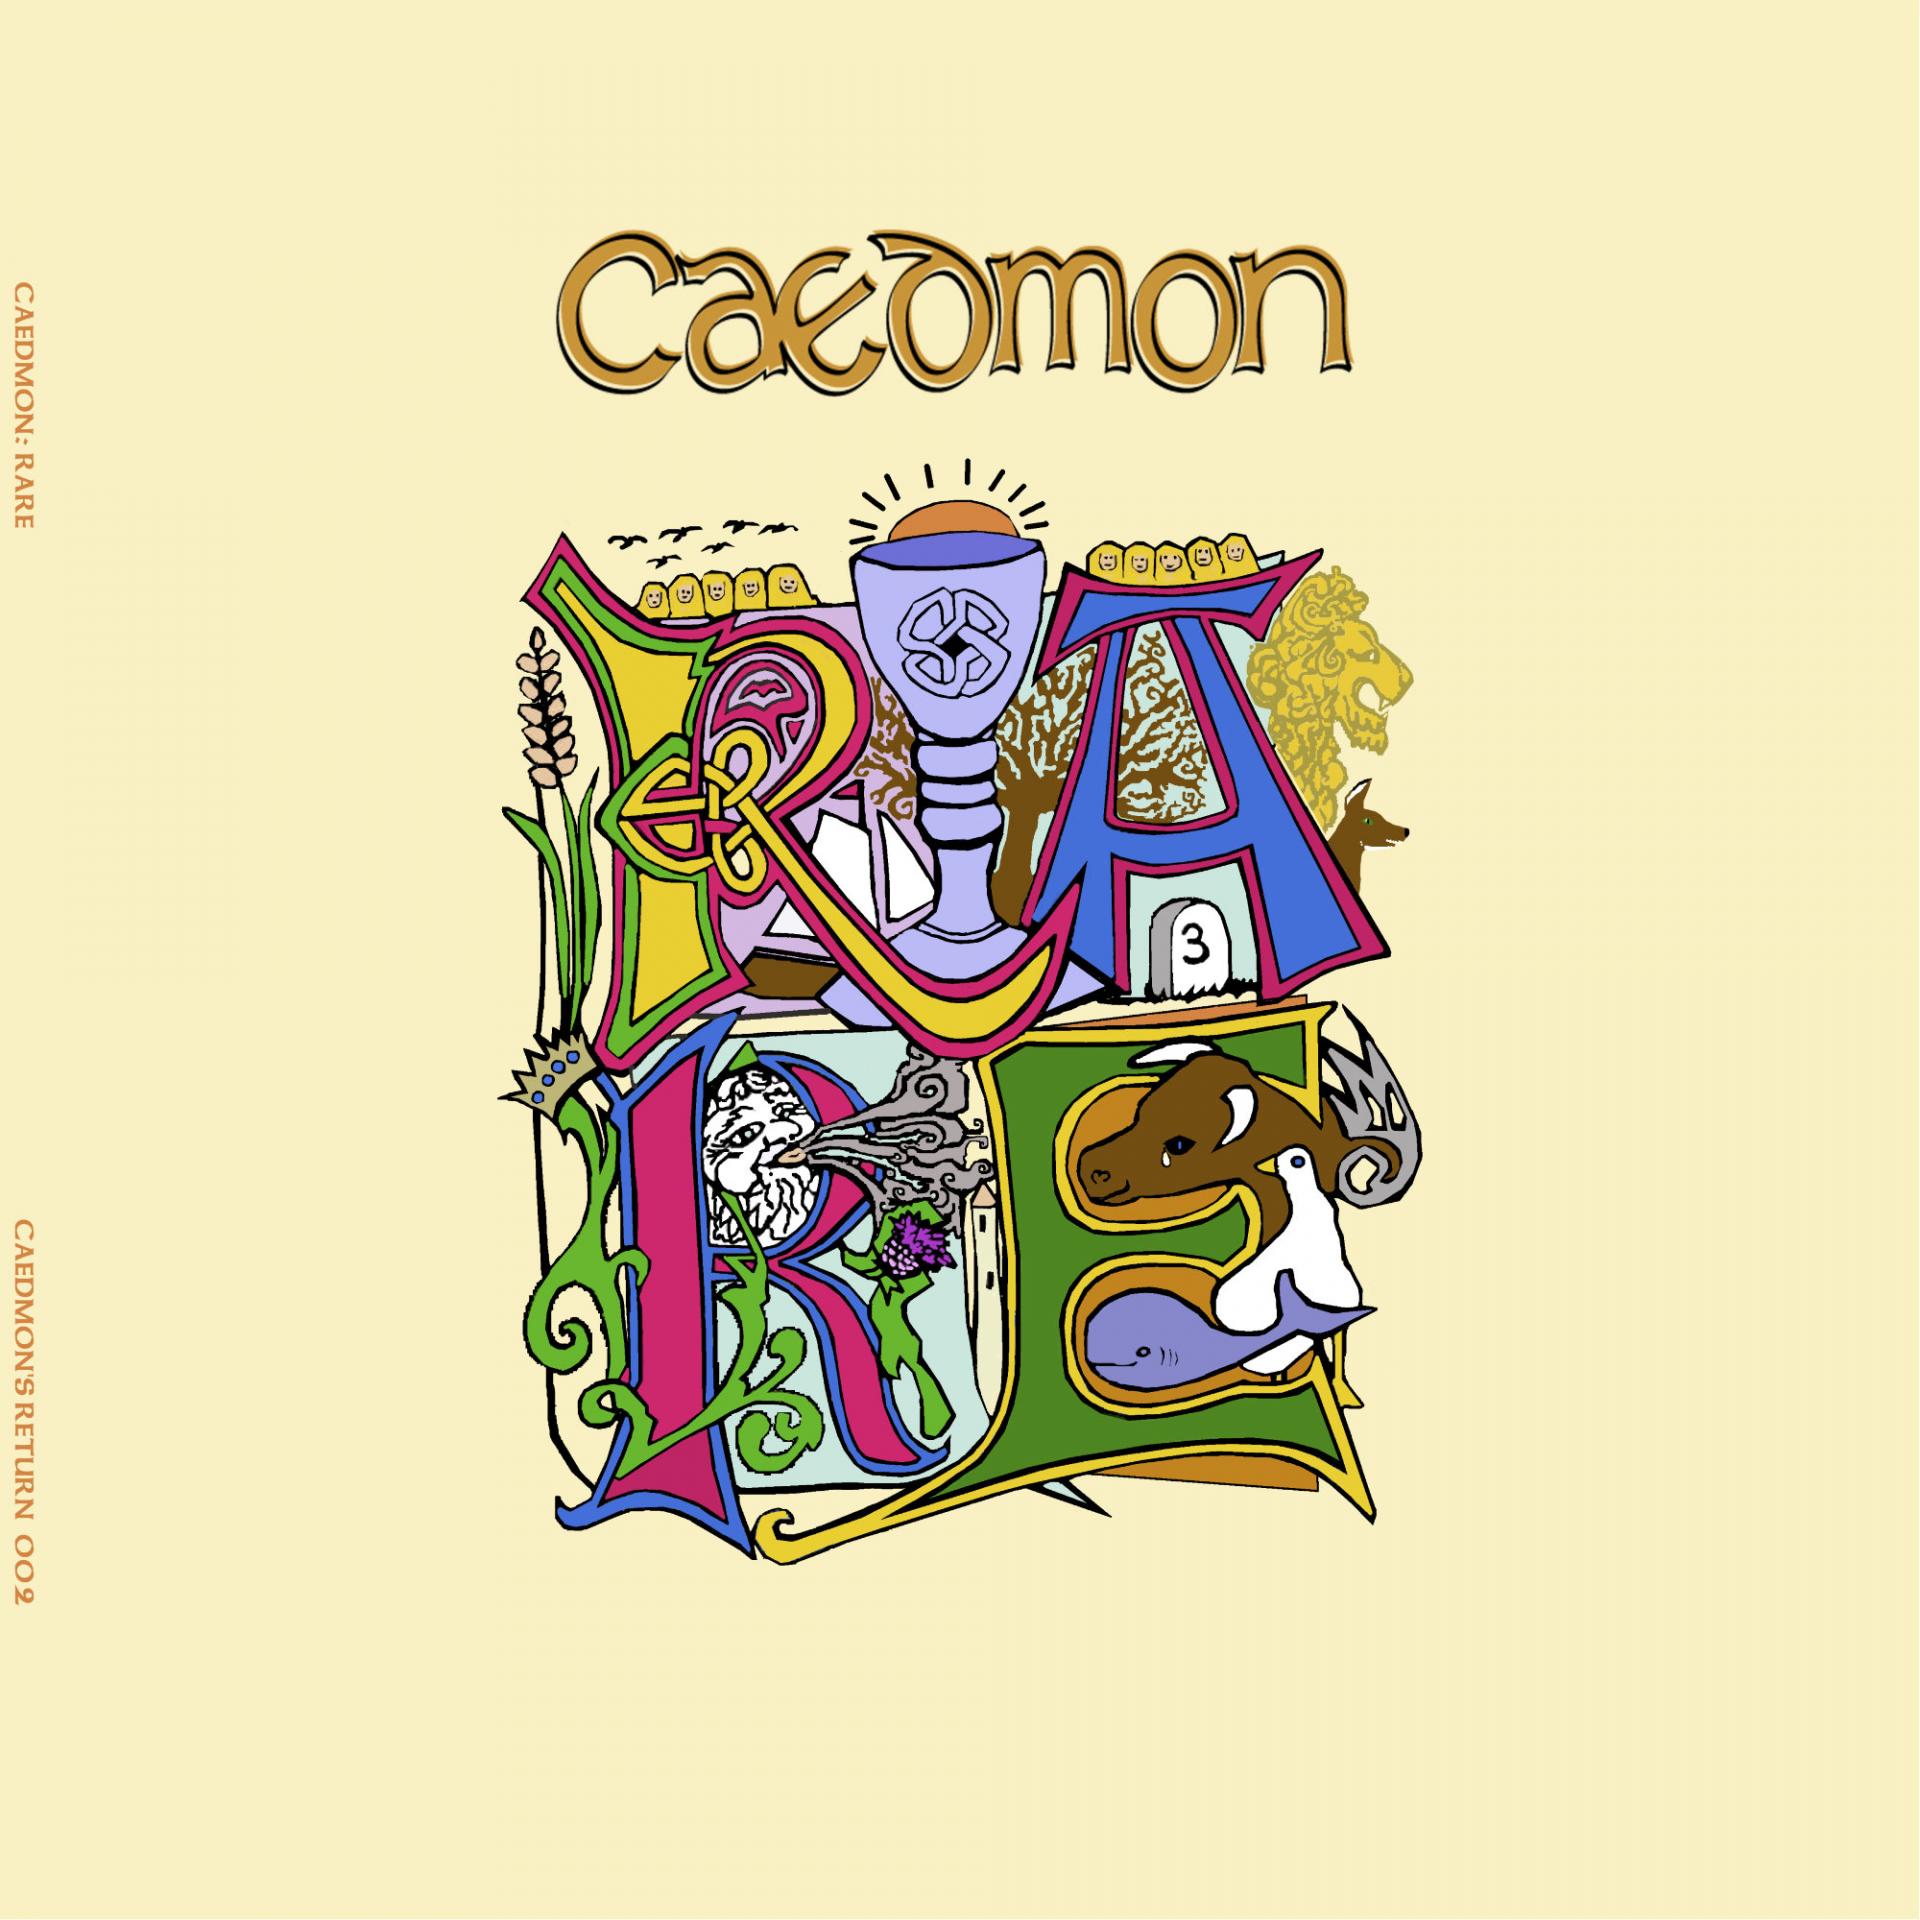 album cover showing 4 highly decorated celtic style letters - R A R E